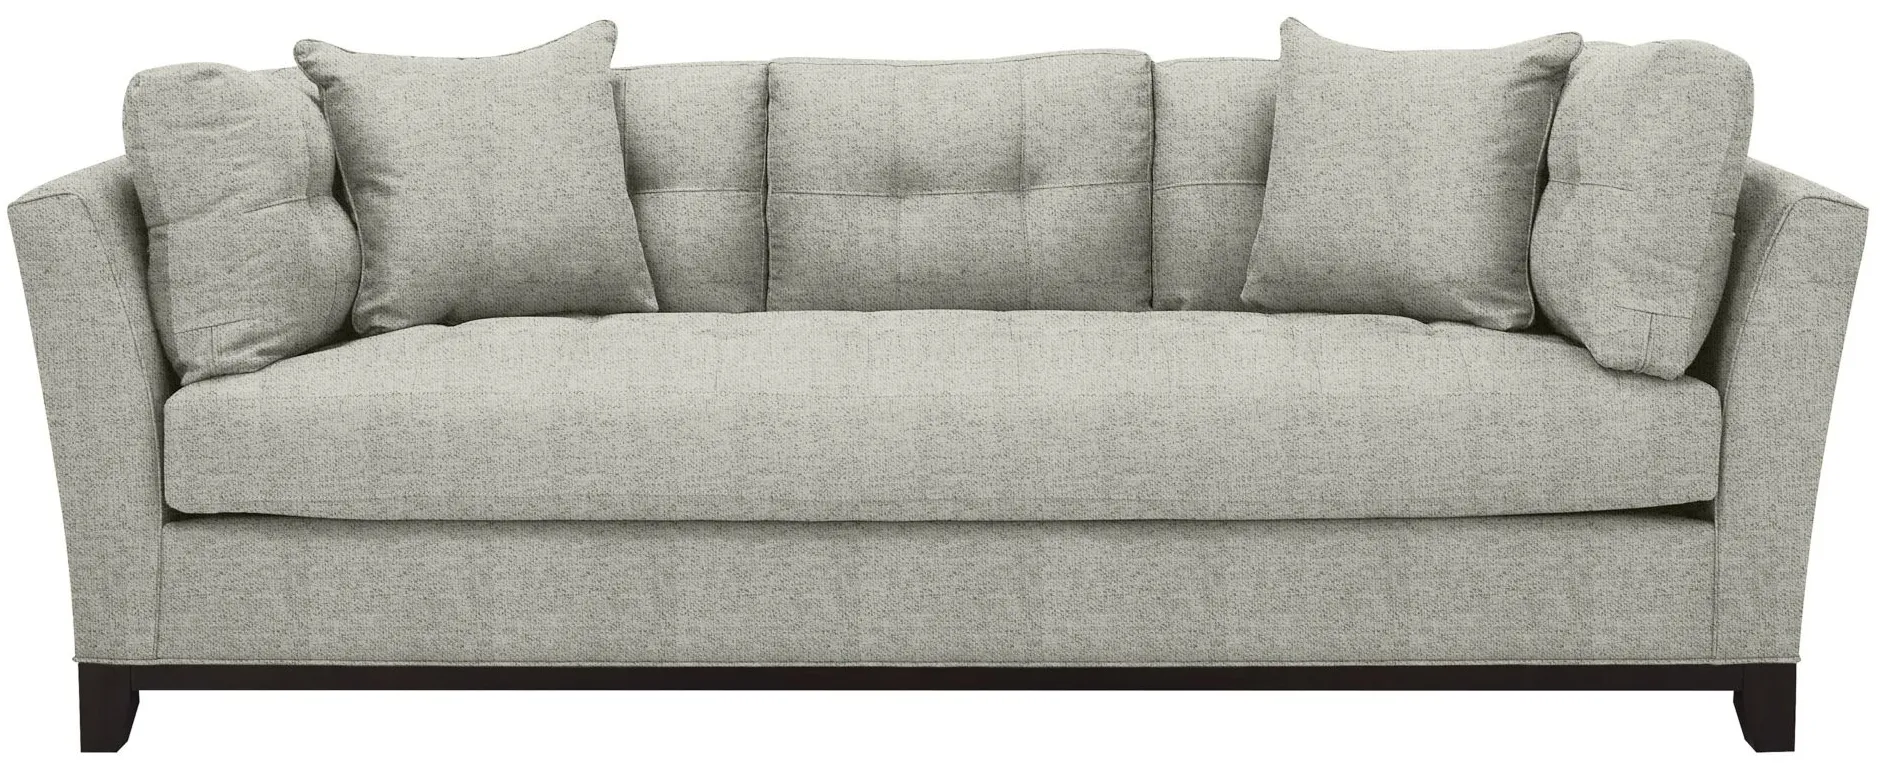 Cityscape Sofa in Elliot Smoke by H.M. Richards